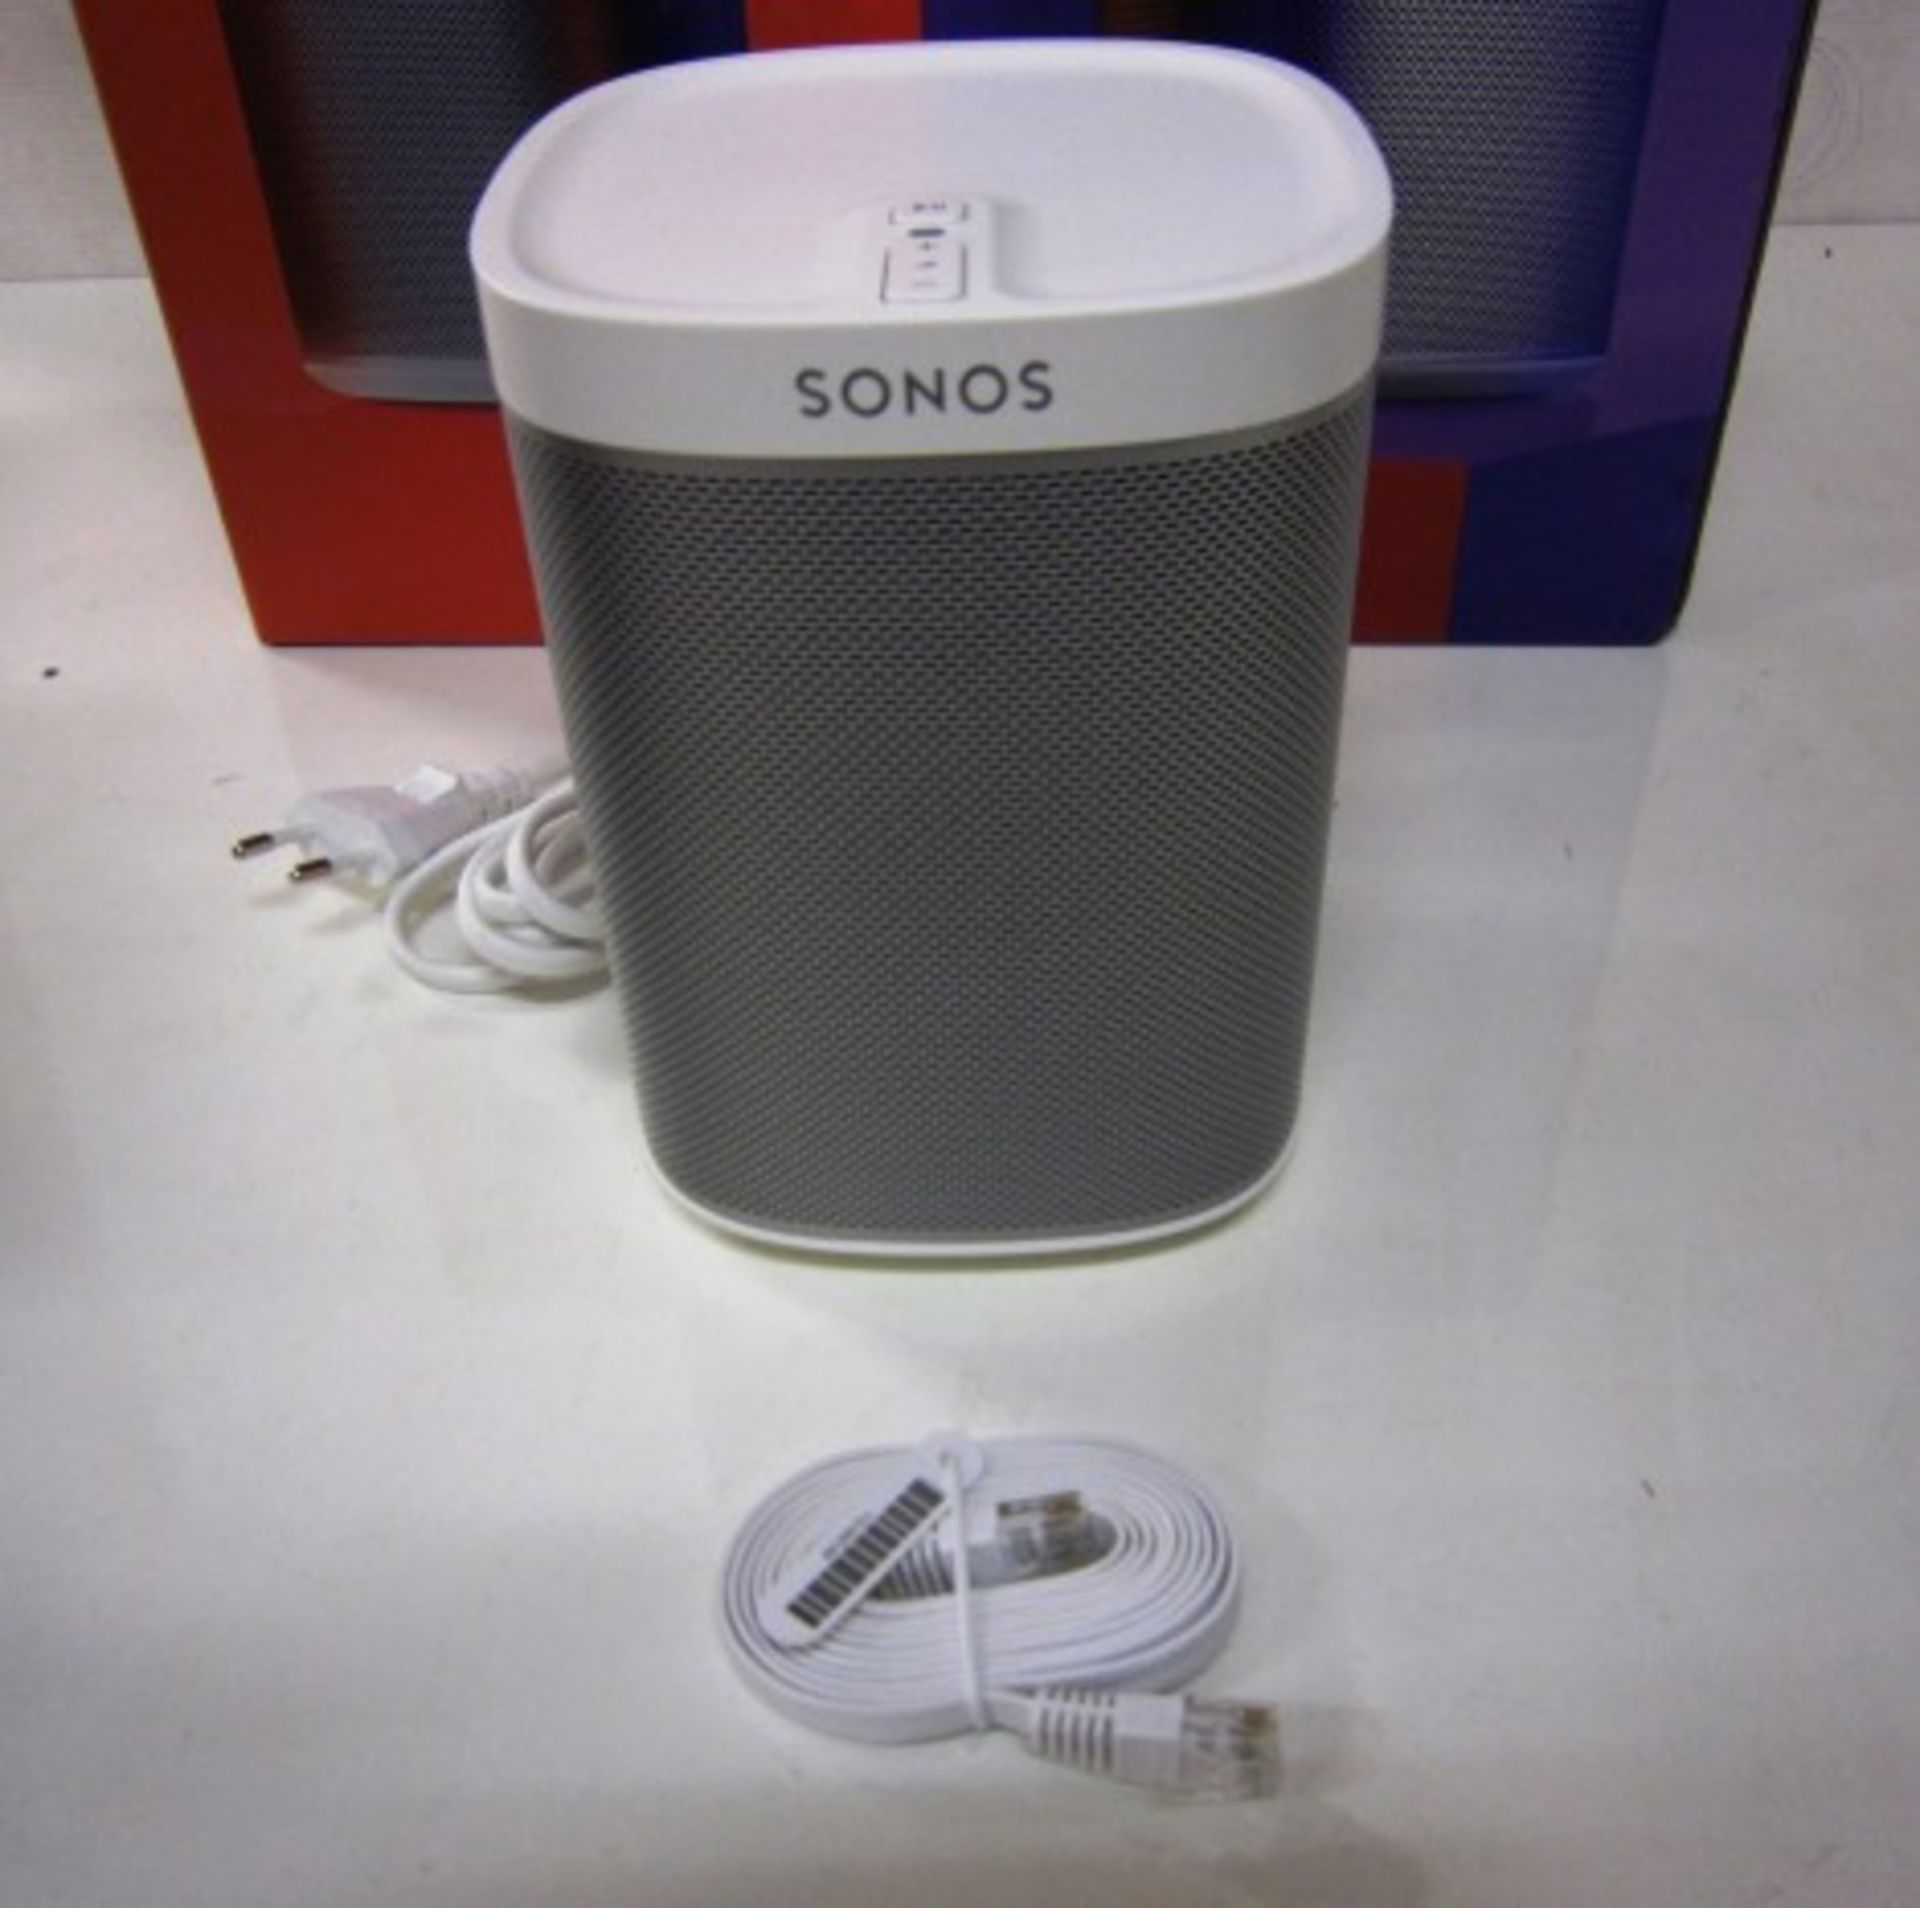 Sonos 2 x Play : 1 starter pack in white tested working looks unused comes in original packaging - Image 2 of 2